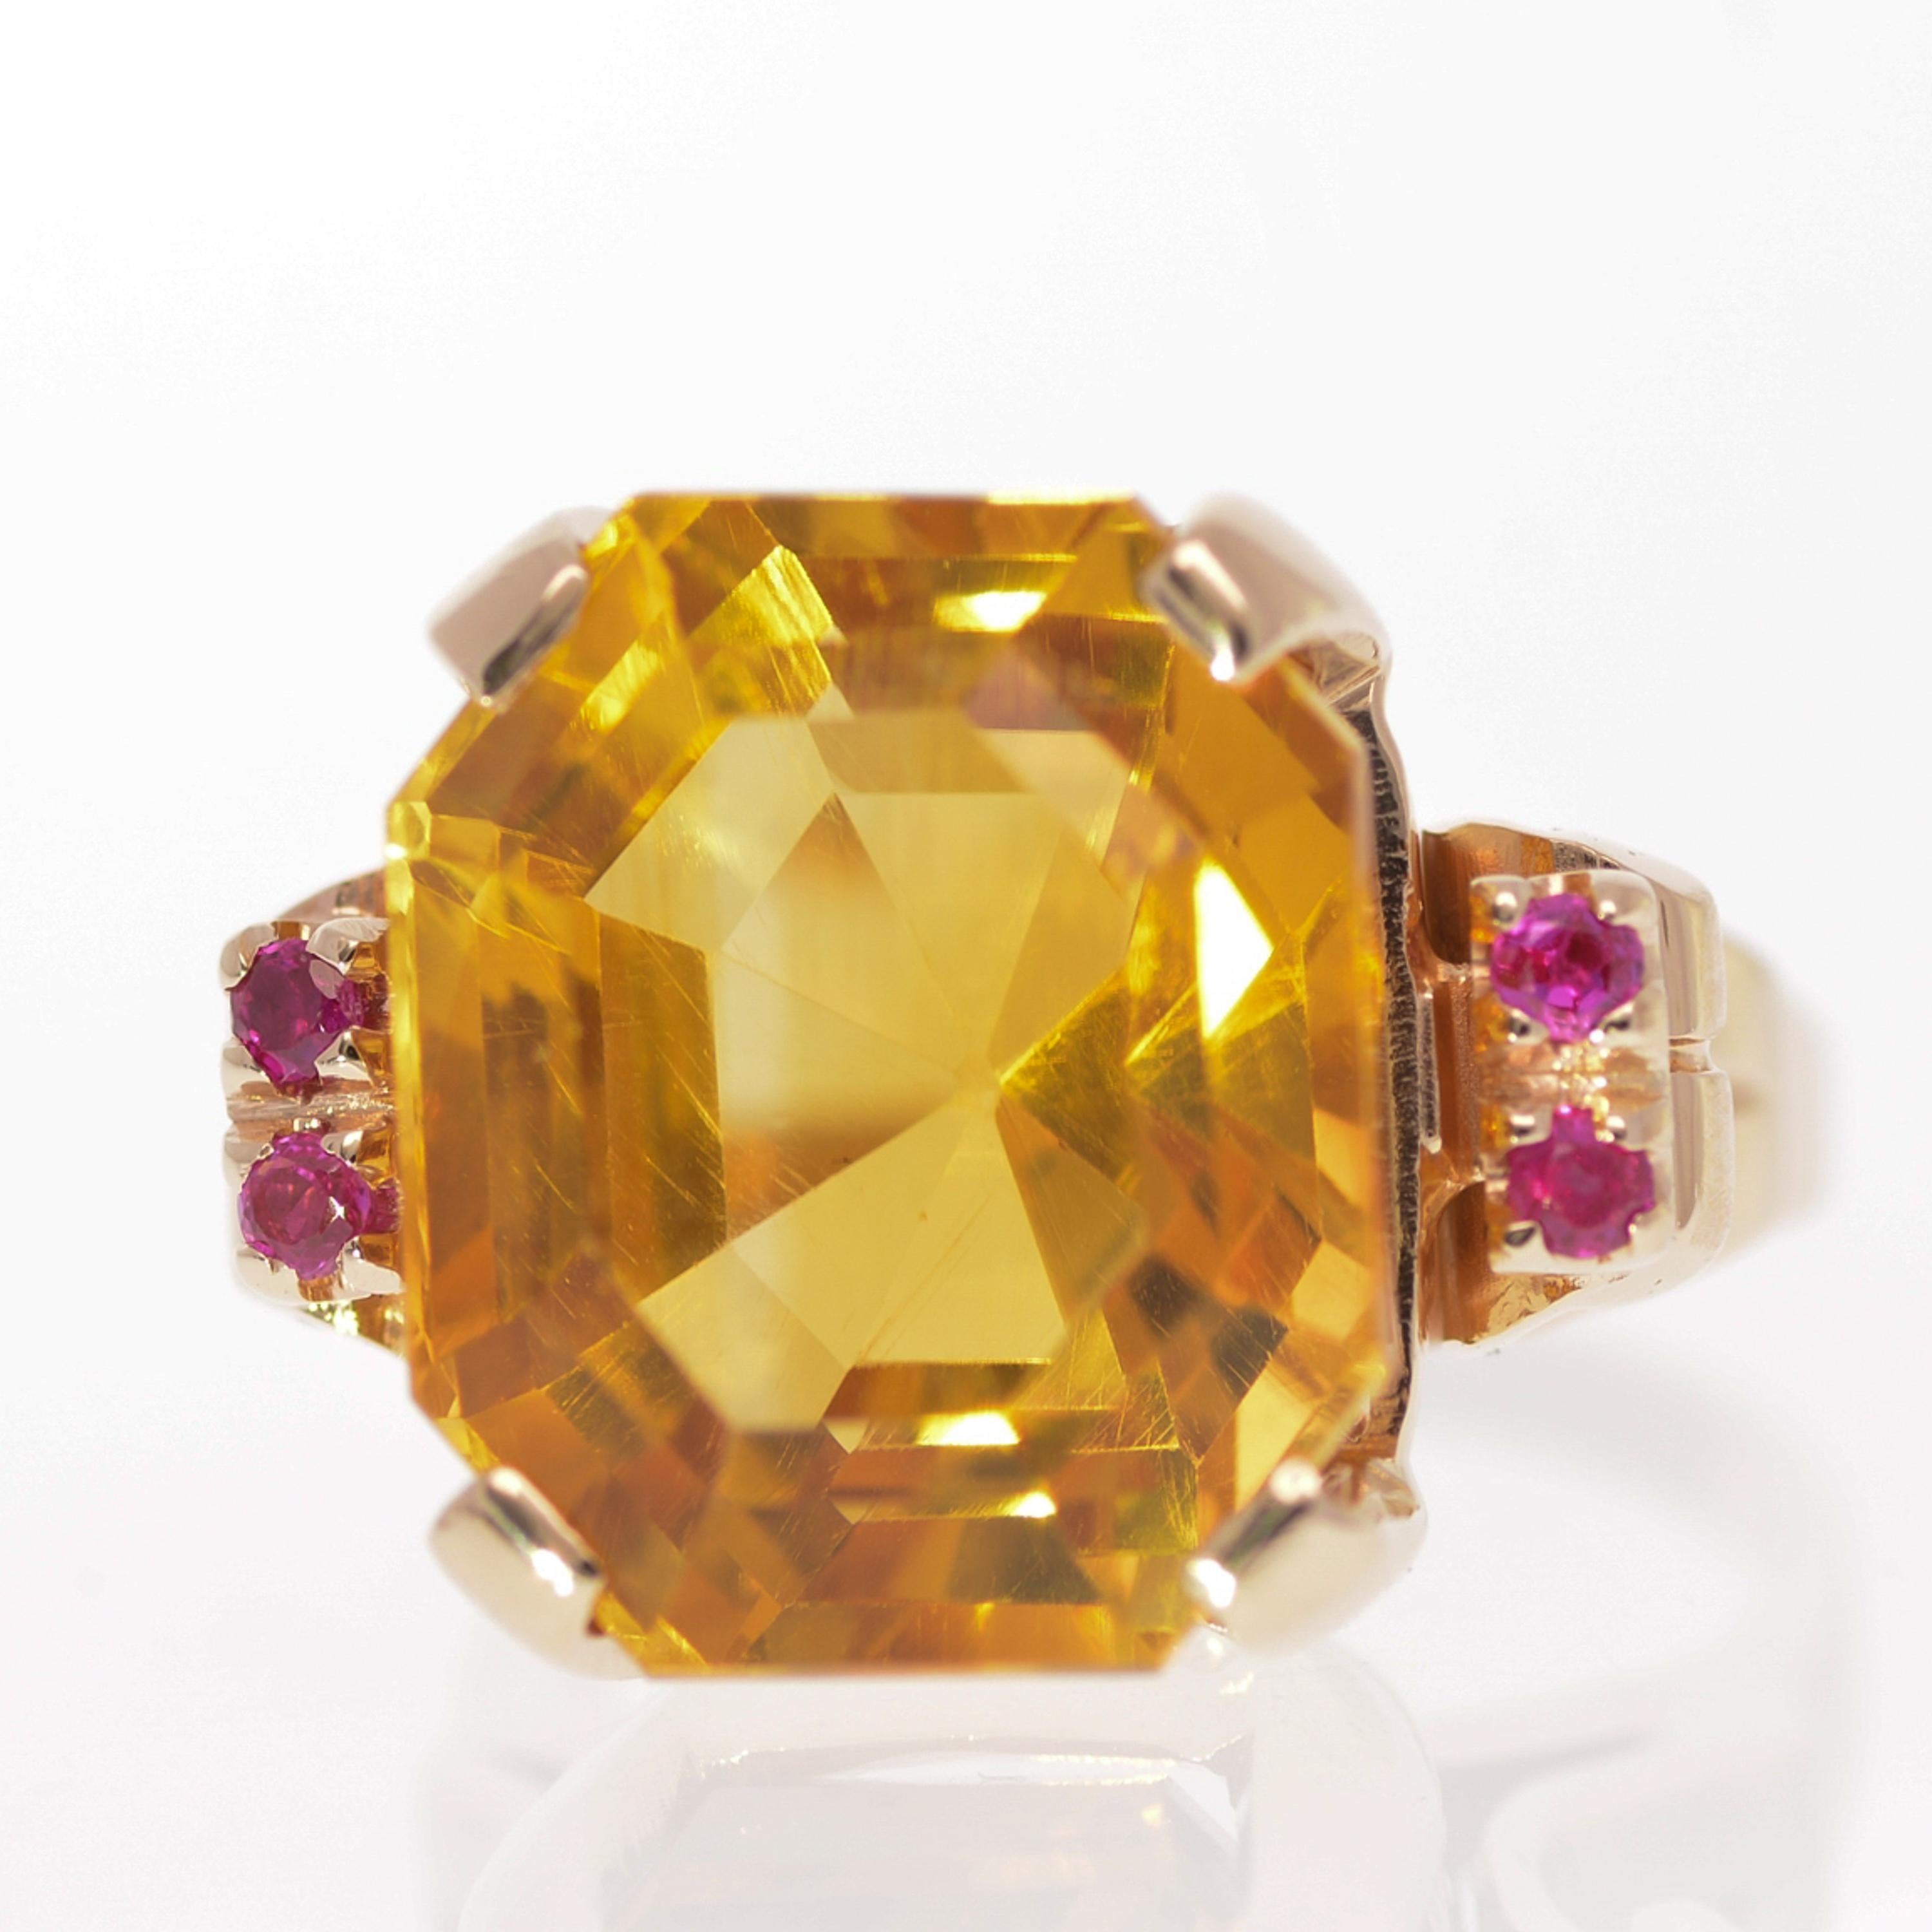 Estate 18 carat Citrine & Ruby 14K Yellow Gold Ring

Main Stone:
Citrine 18 carat
Square cut
Secondary Stone:
Ruby
Metal:
Yellow Gold
Purity:
14K
Total Gram Weight:
14.40
Size:
7 Up to 10 & Down to 6

JESSUP’S PRICE: $800.00!

#162137-6
Big Bold &